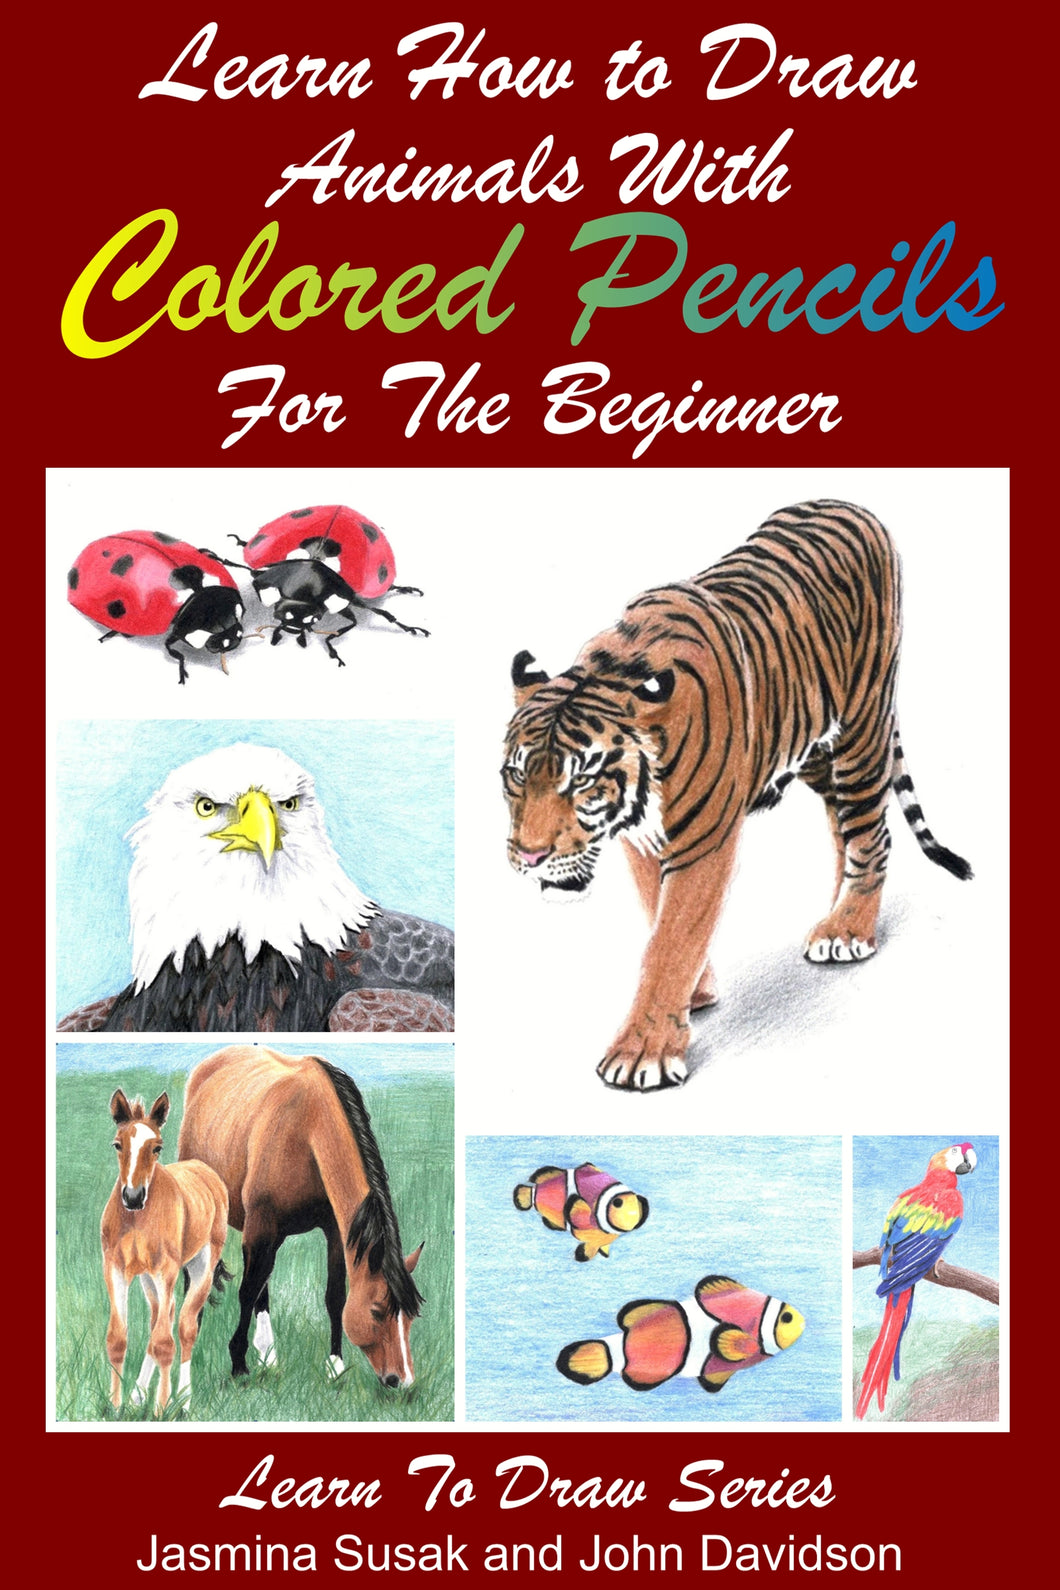 Learn How to Draw Animals with Colored Pencils For the Beginner